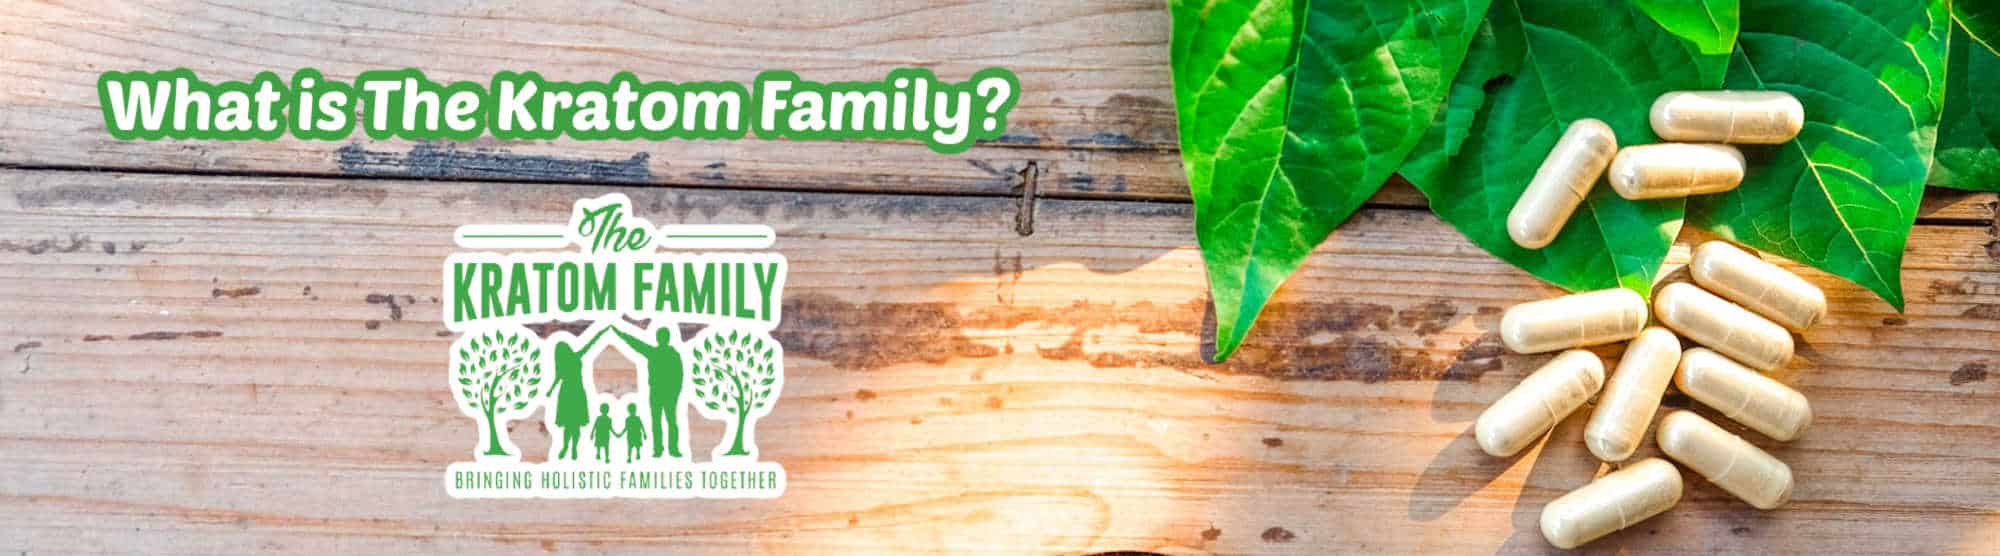 The Kratom Family : Is This Bluefield Brand Legit?